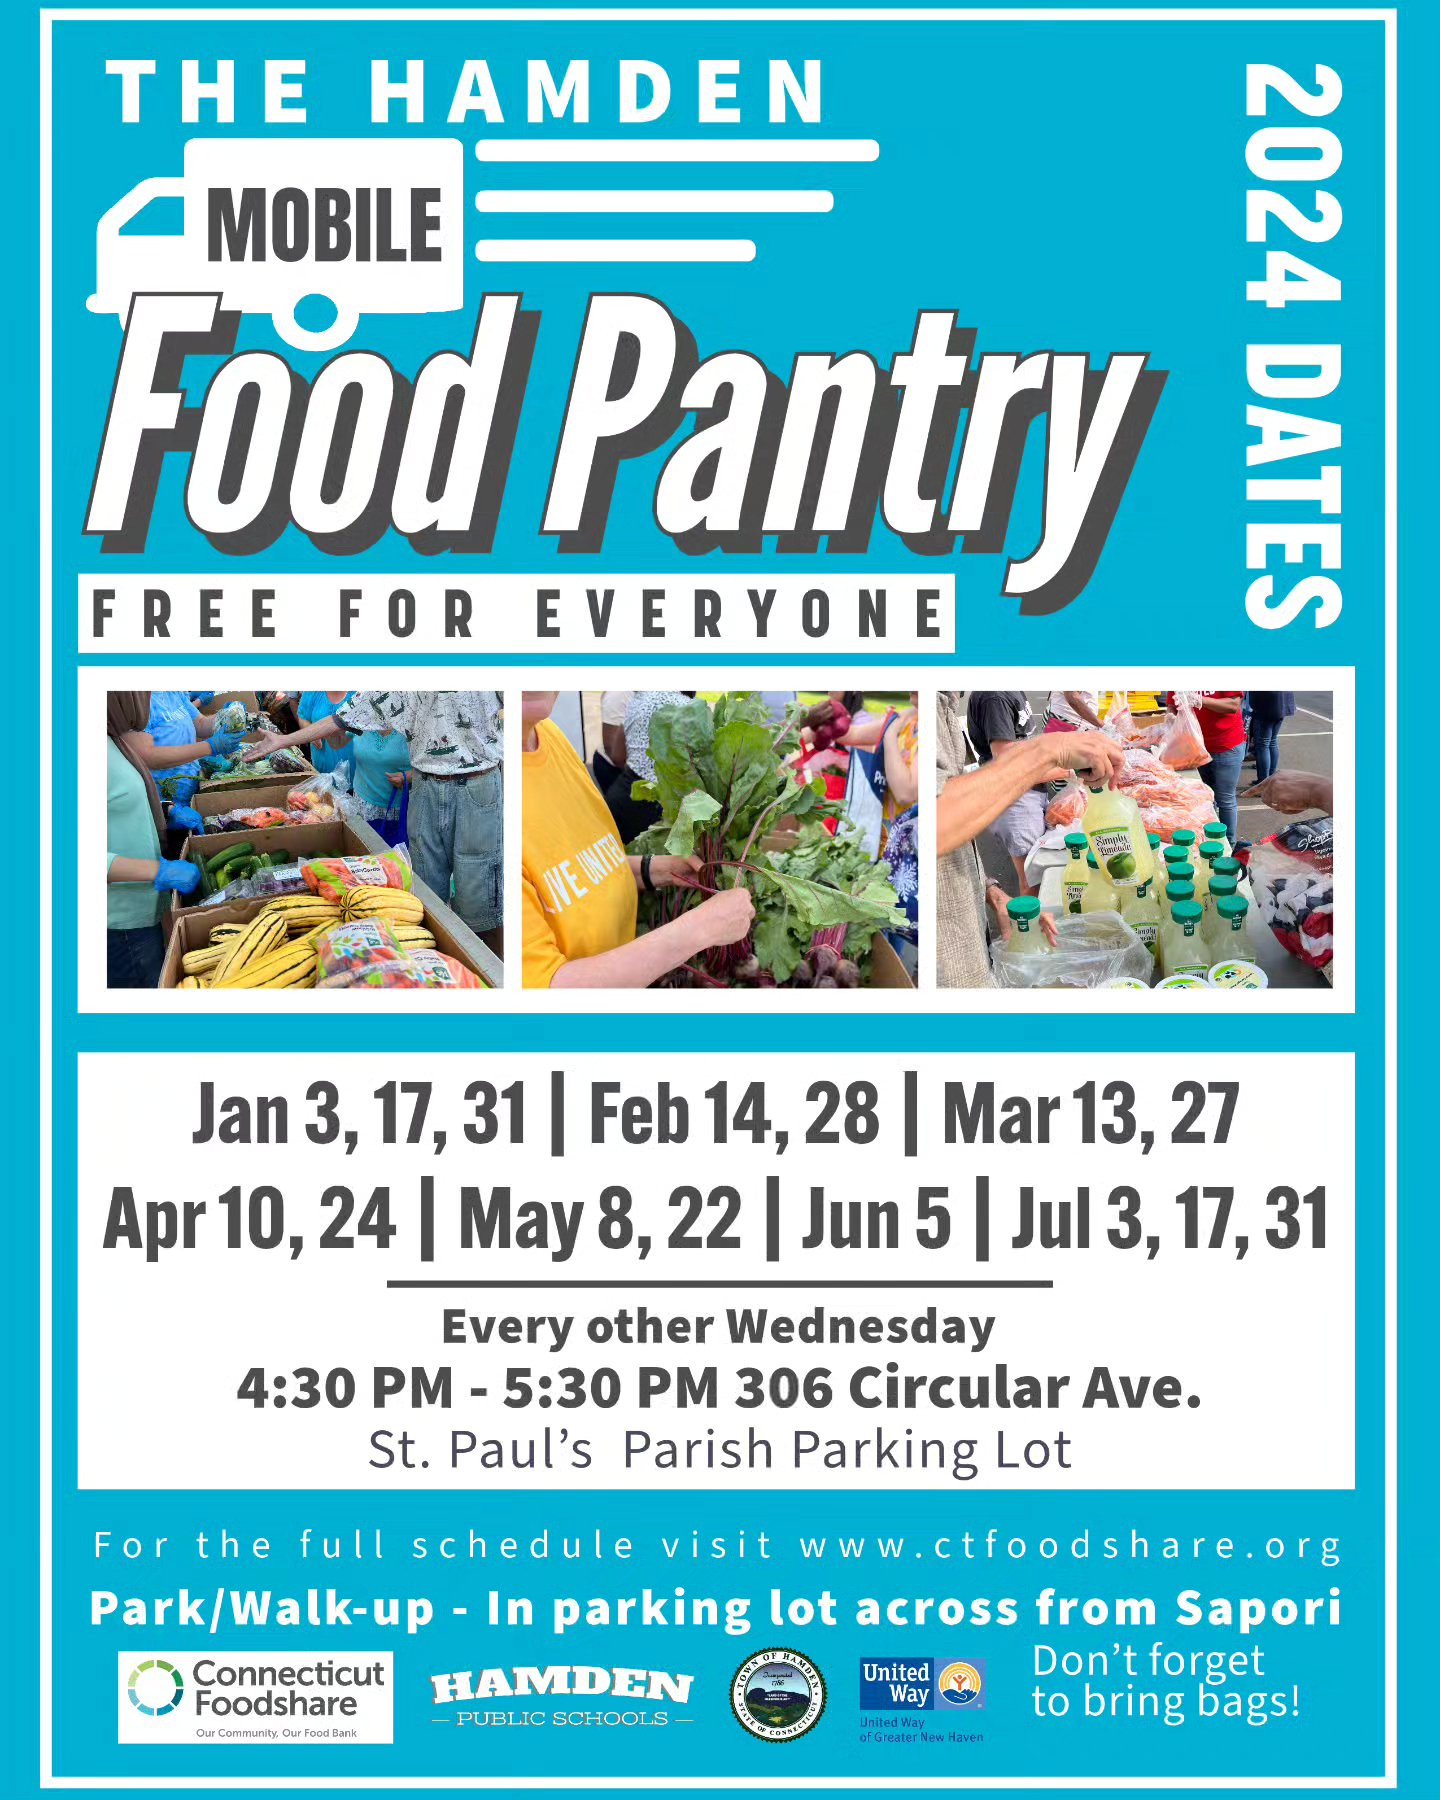 May be an image of 3 people and text that says 'THE HAMDEN MOBILE 2024 Food FREE FOR EVERYONE Pantry DATES Jan 3, 17,31 Feb 14, 28 Mar 13, 27 Apr 10, 24 May 8,22 22 Jun 5 I Jul3, 17,31 Every other Wednesday 4:30 PM- 5:30 PM 306 Circular Ave. St. Paul's Parish Parking Lot For the full schedule visit .ctfoodshare.org Park/Walk-up In parking lot across from Sapori Connecticut Don't forget Foodshare HAMDEN to bring bags! OroBn PUBLICSCHOOLS United way'